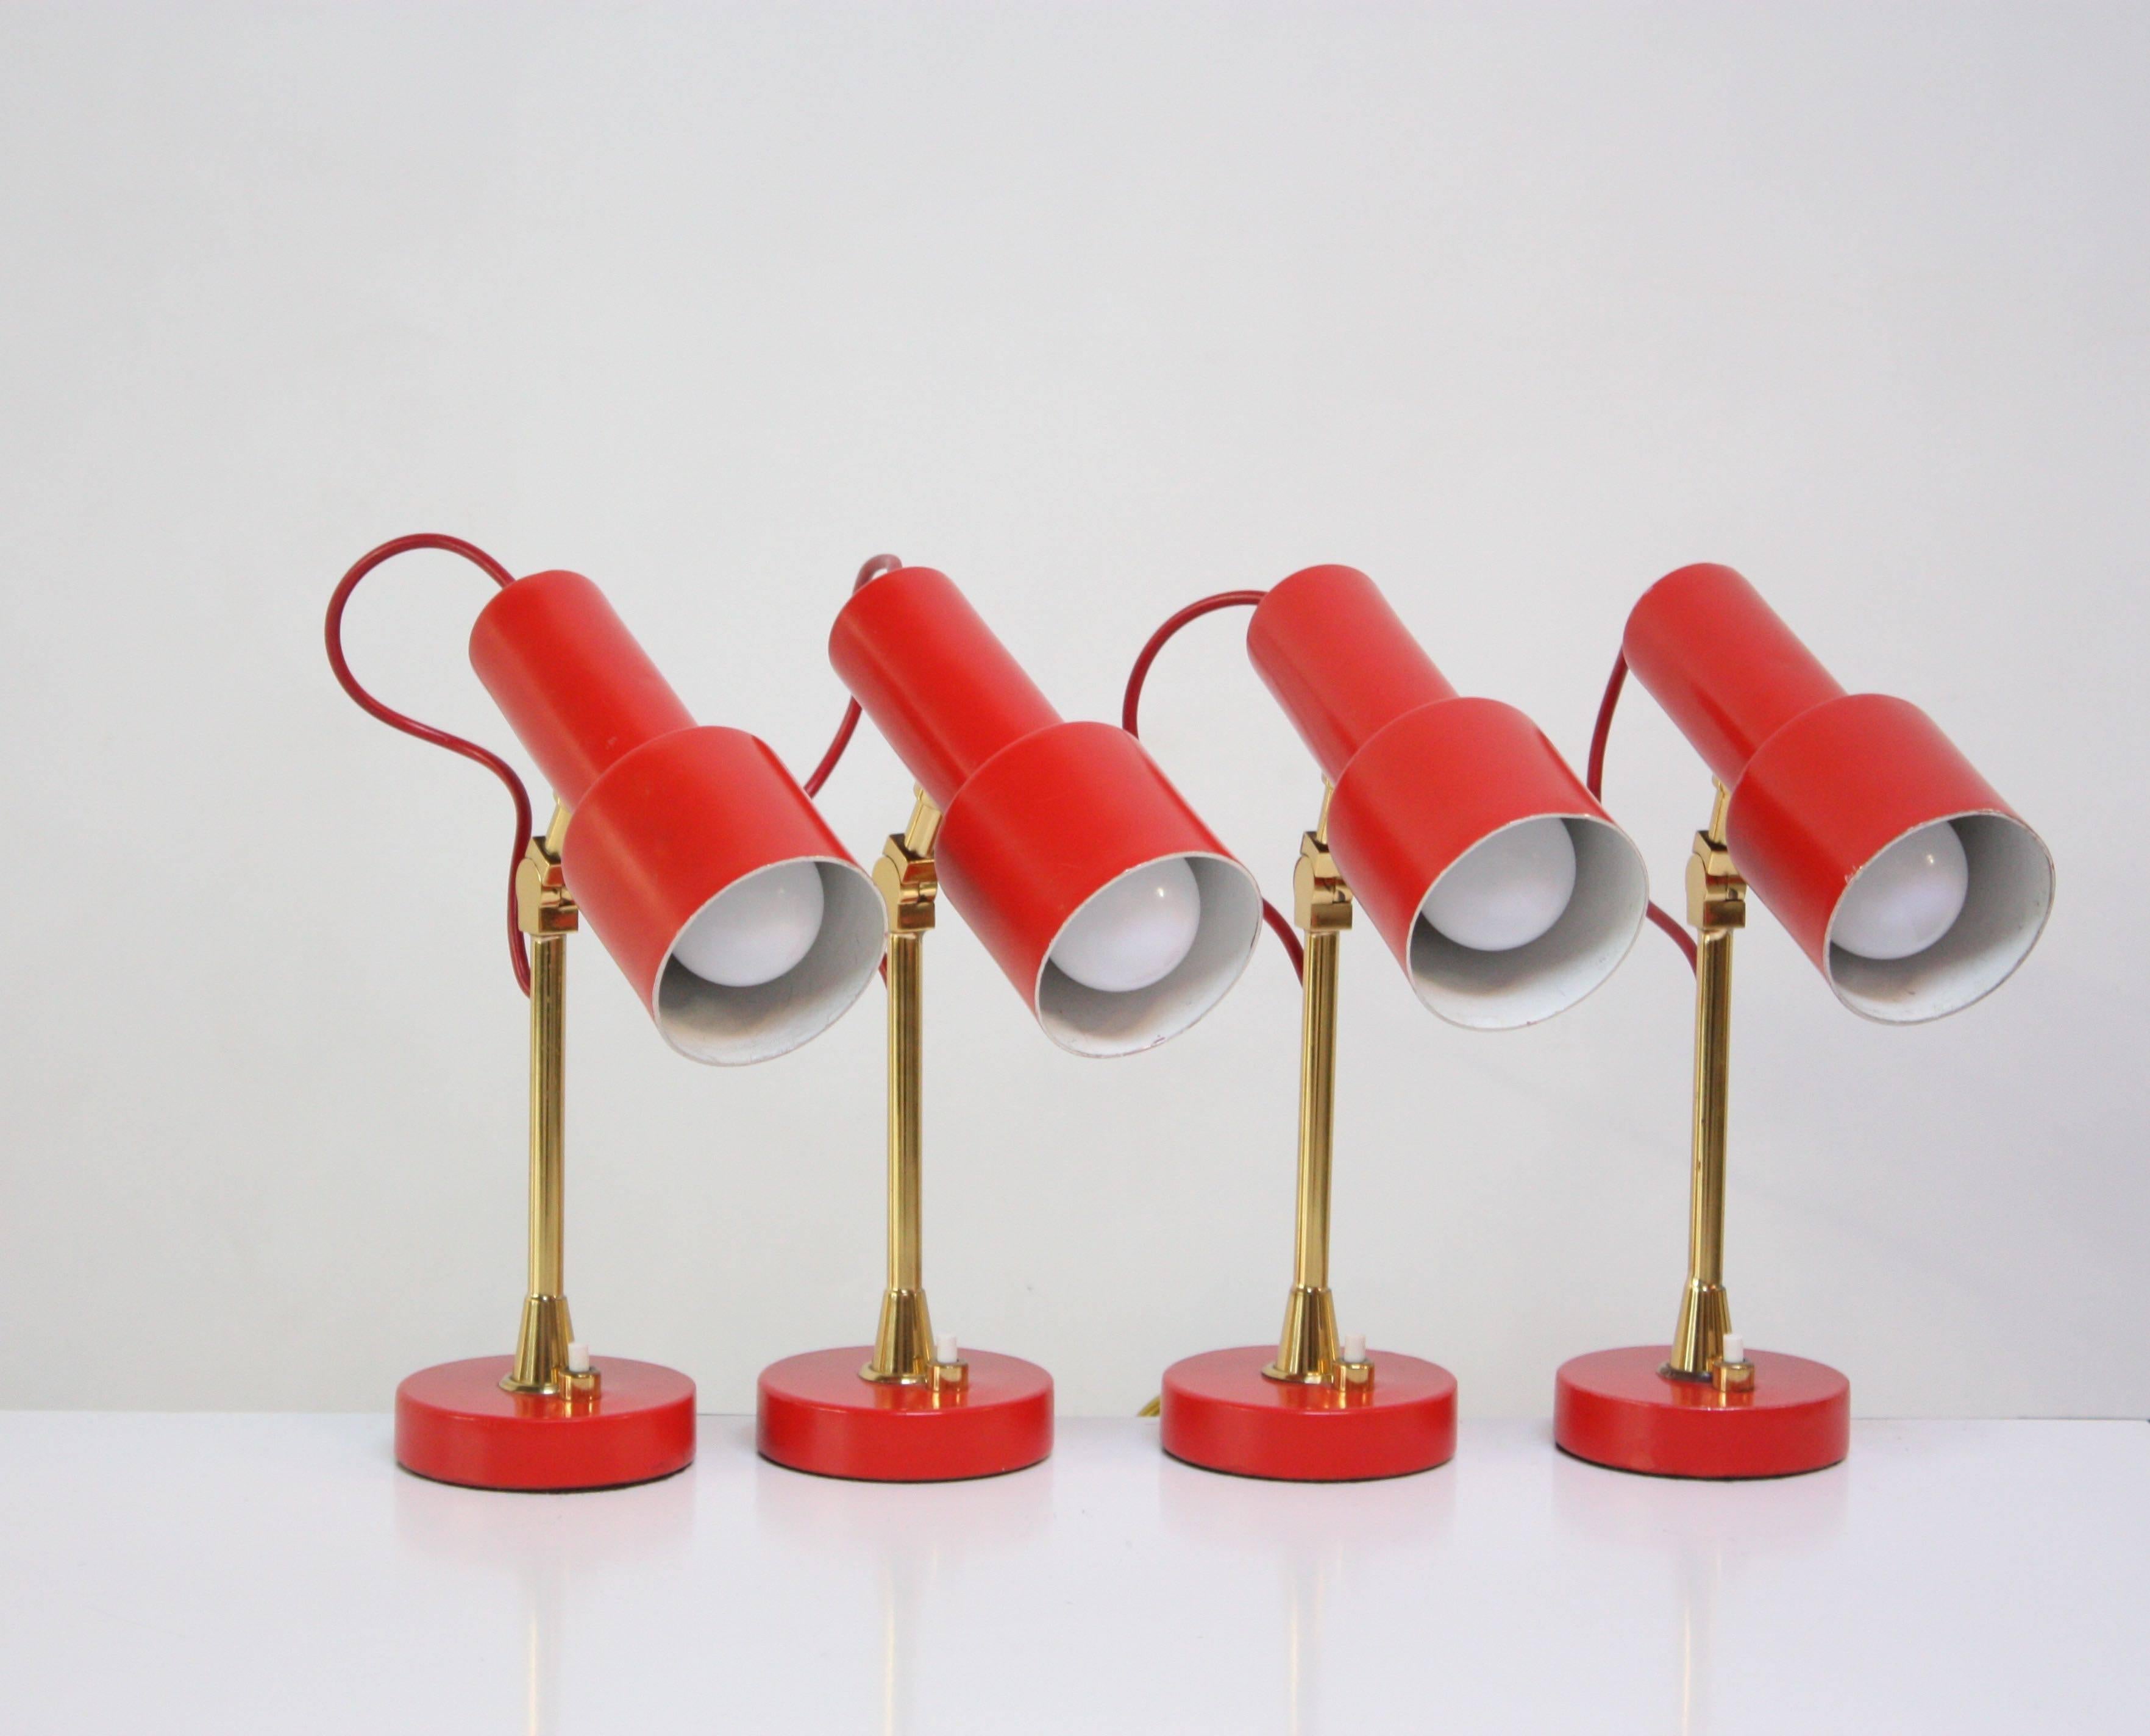 These small, adjustable Stilux table lamps are in original condition, retaining their original red paint and all solid brass hardware (screws). They have been completely rewired and are ready for use. They came from the Hotel Irma in Chianciano